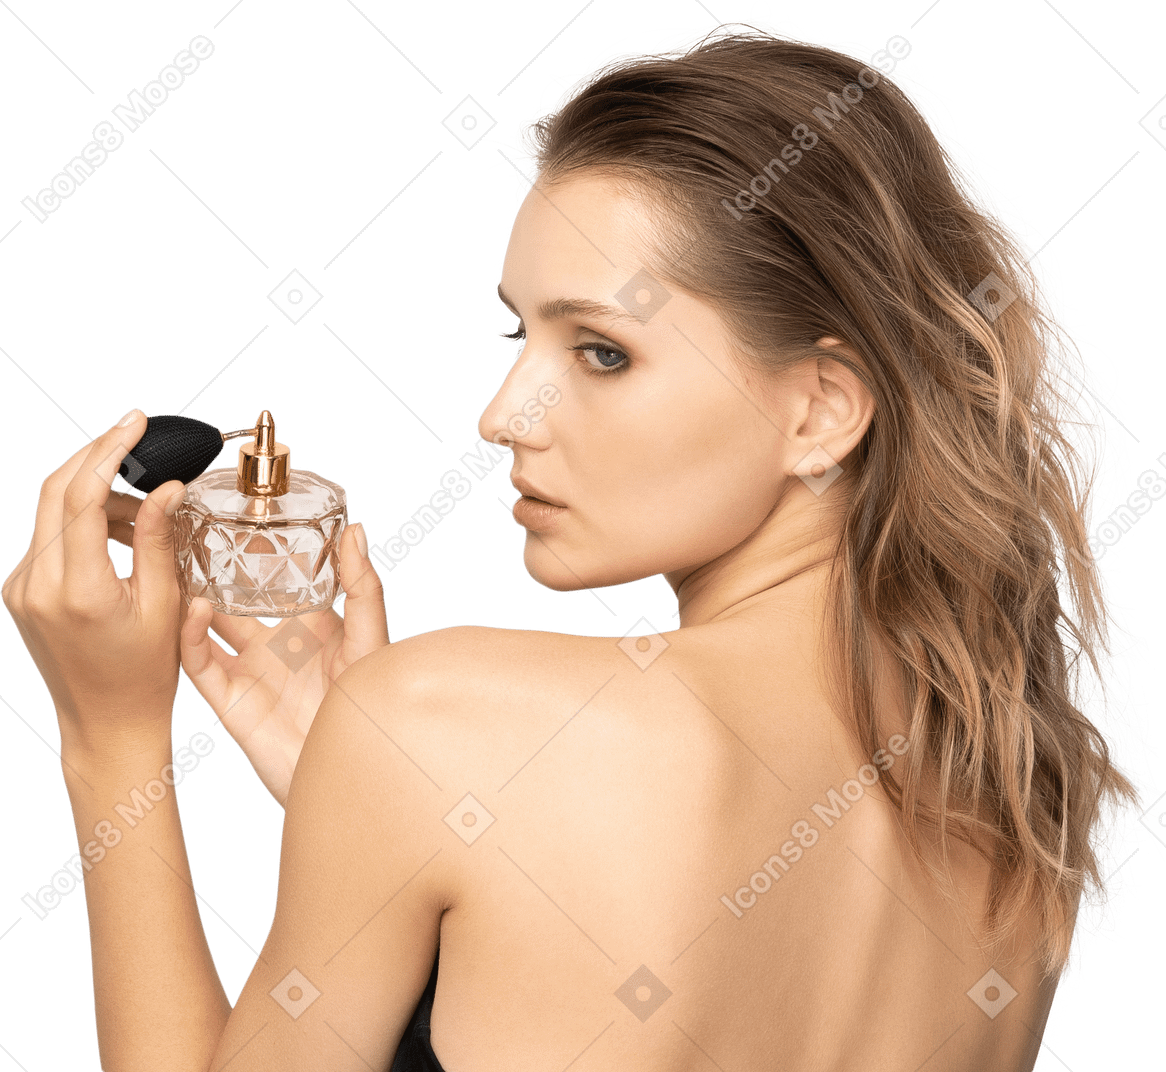 Back view of a sensual young woman holding a bottle of perfume